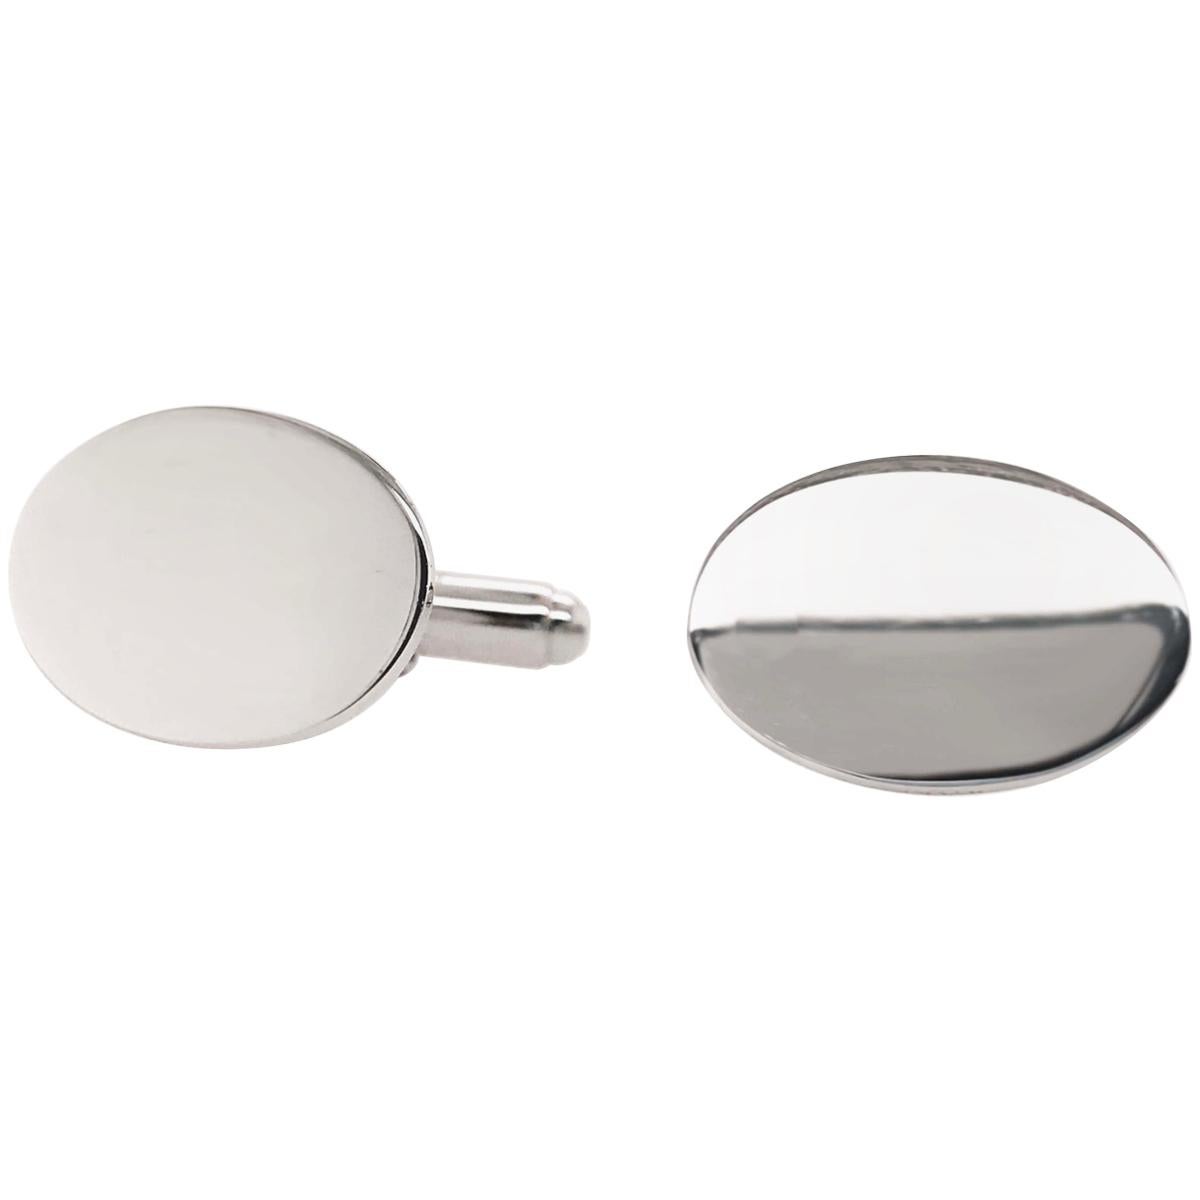 Beautiful Sterling silver 925 sterling Sterling Silver Rhodium-plated Black Enameled Cuff Links